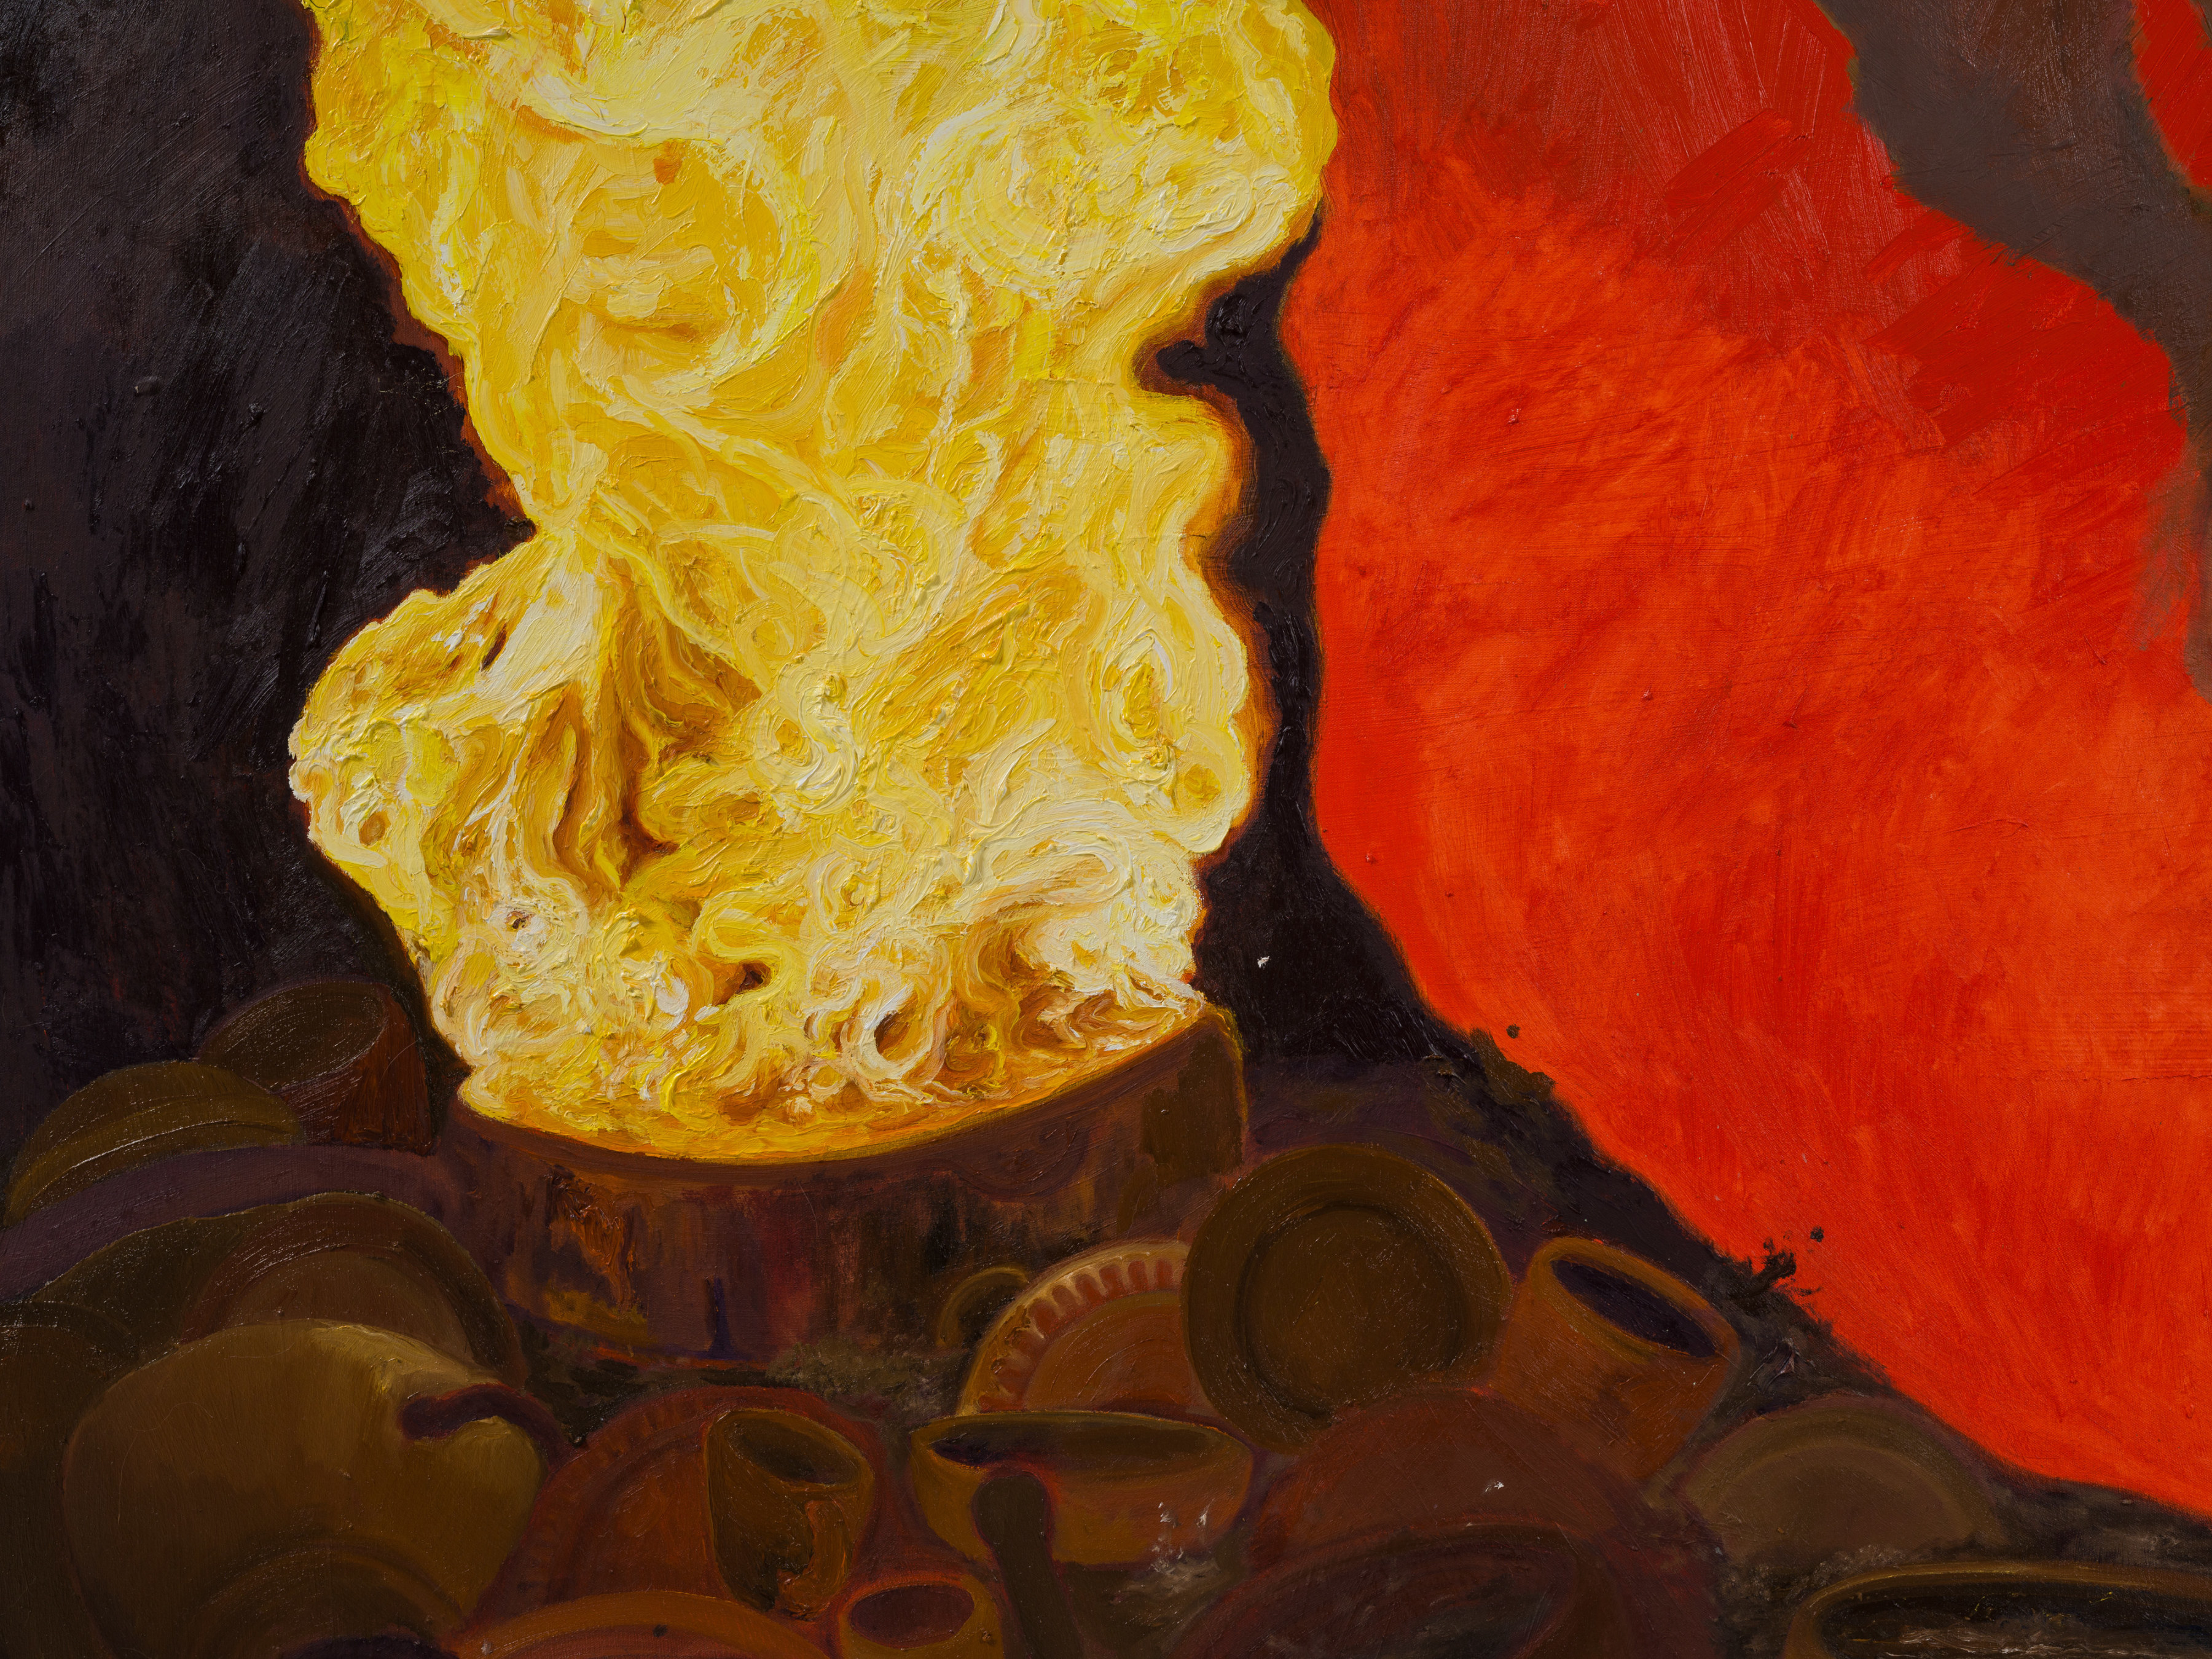 Detail of Veronica Fernandez's "The Last Ten Dollars" depicting a pile of pots and plates with a burst of flame emerging from a large cauldron.